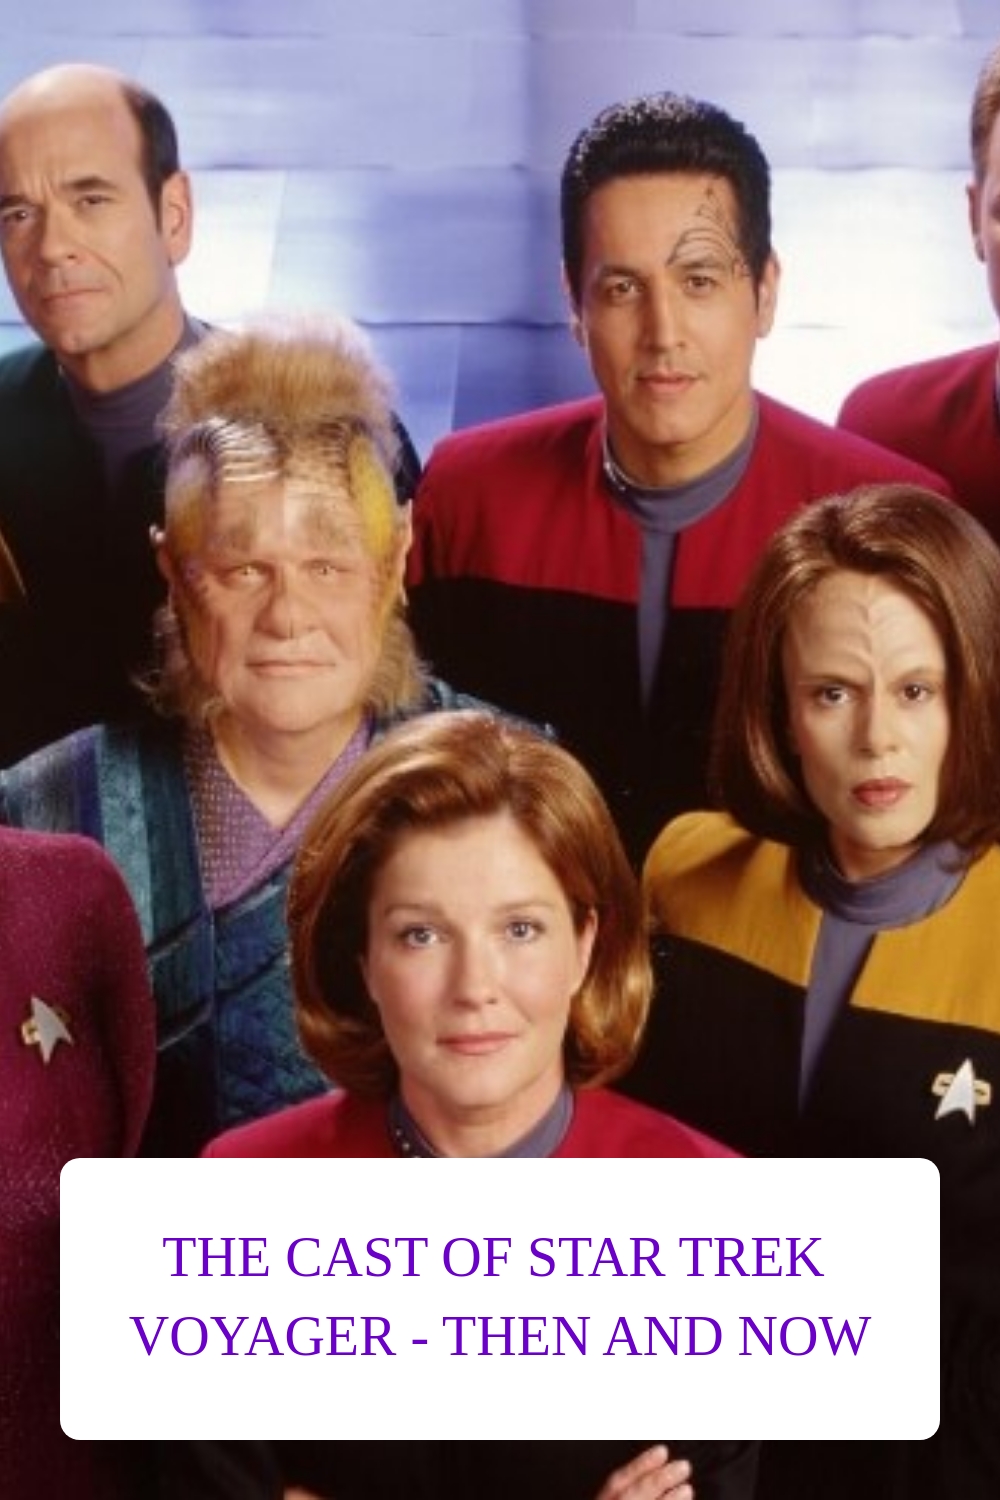 The Cast of Star Trek Voyager Then and Now generated pin 56626